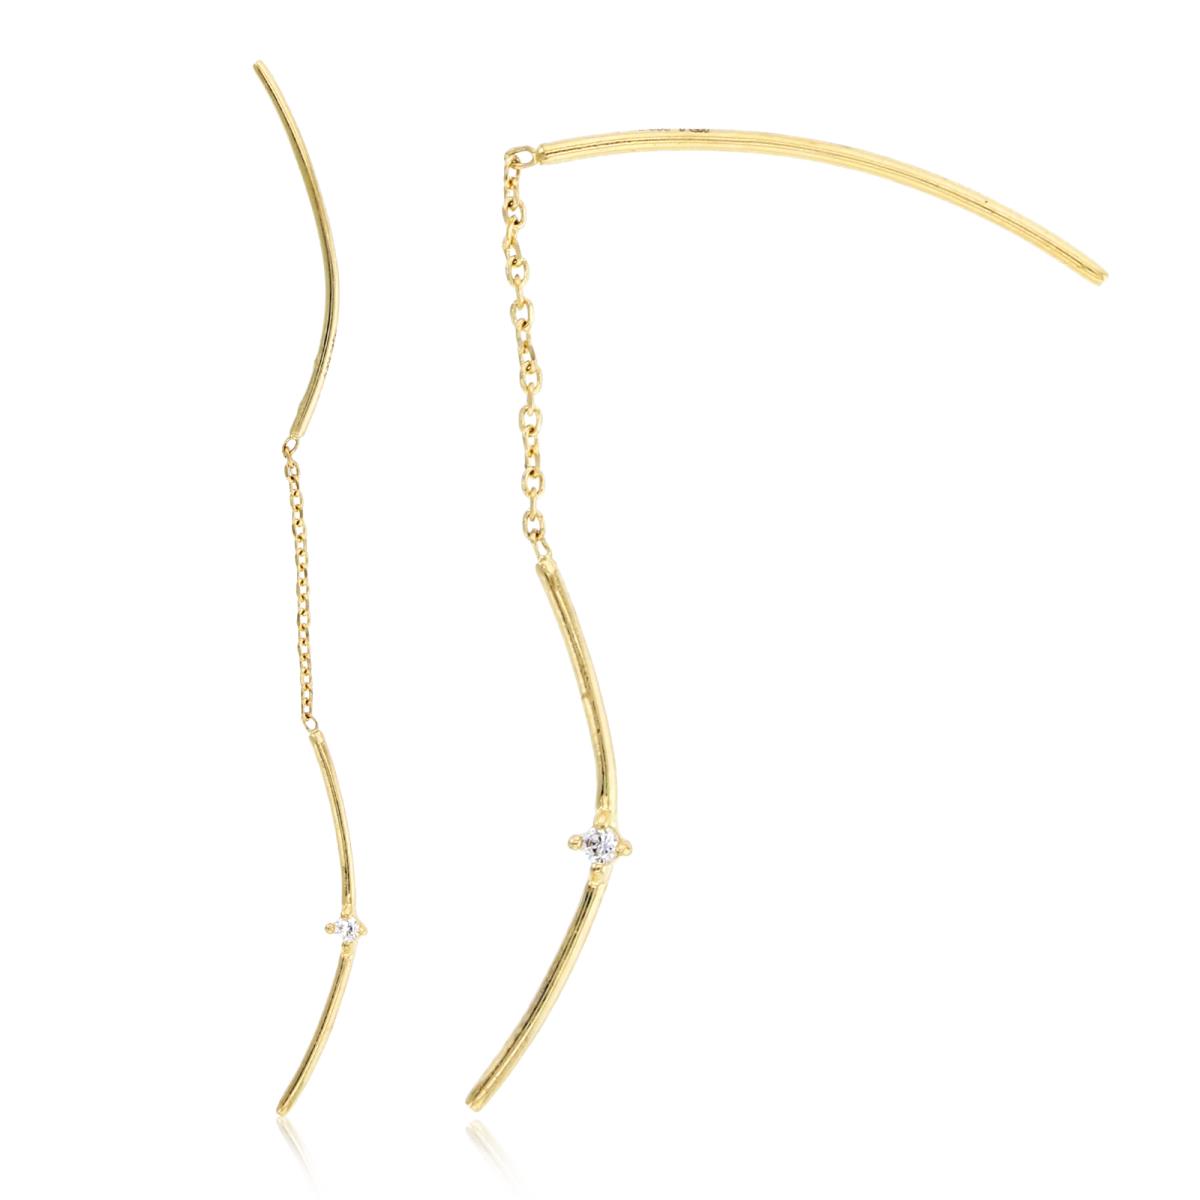 10K Yellow Gold Rnd CZ Tubes Double Sided Earrings